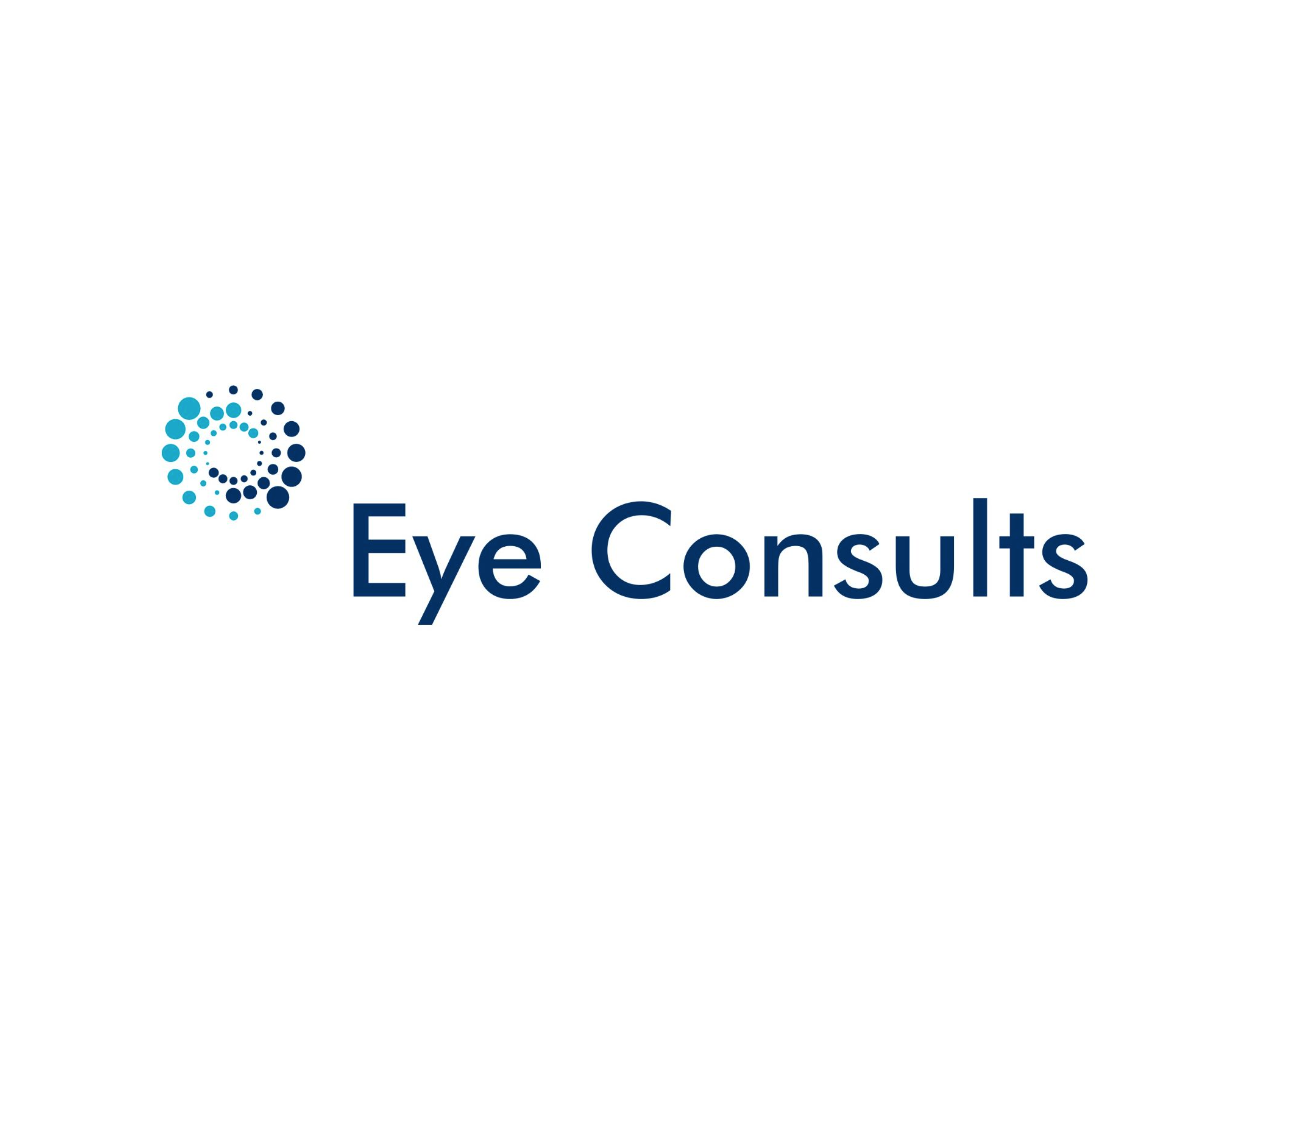 Eye Consults